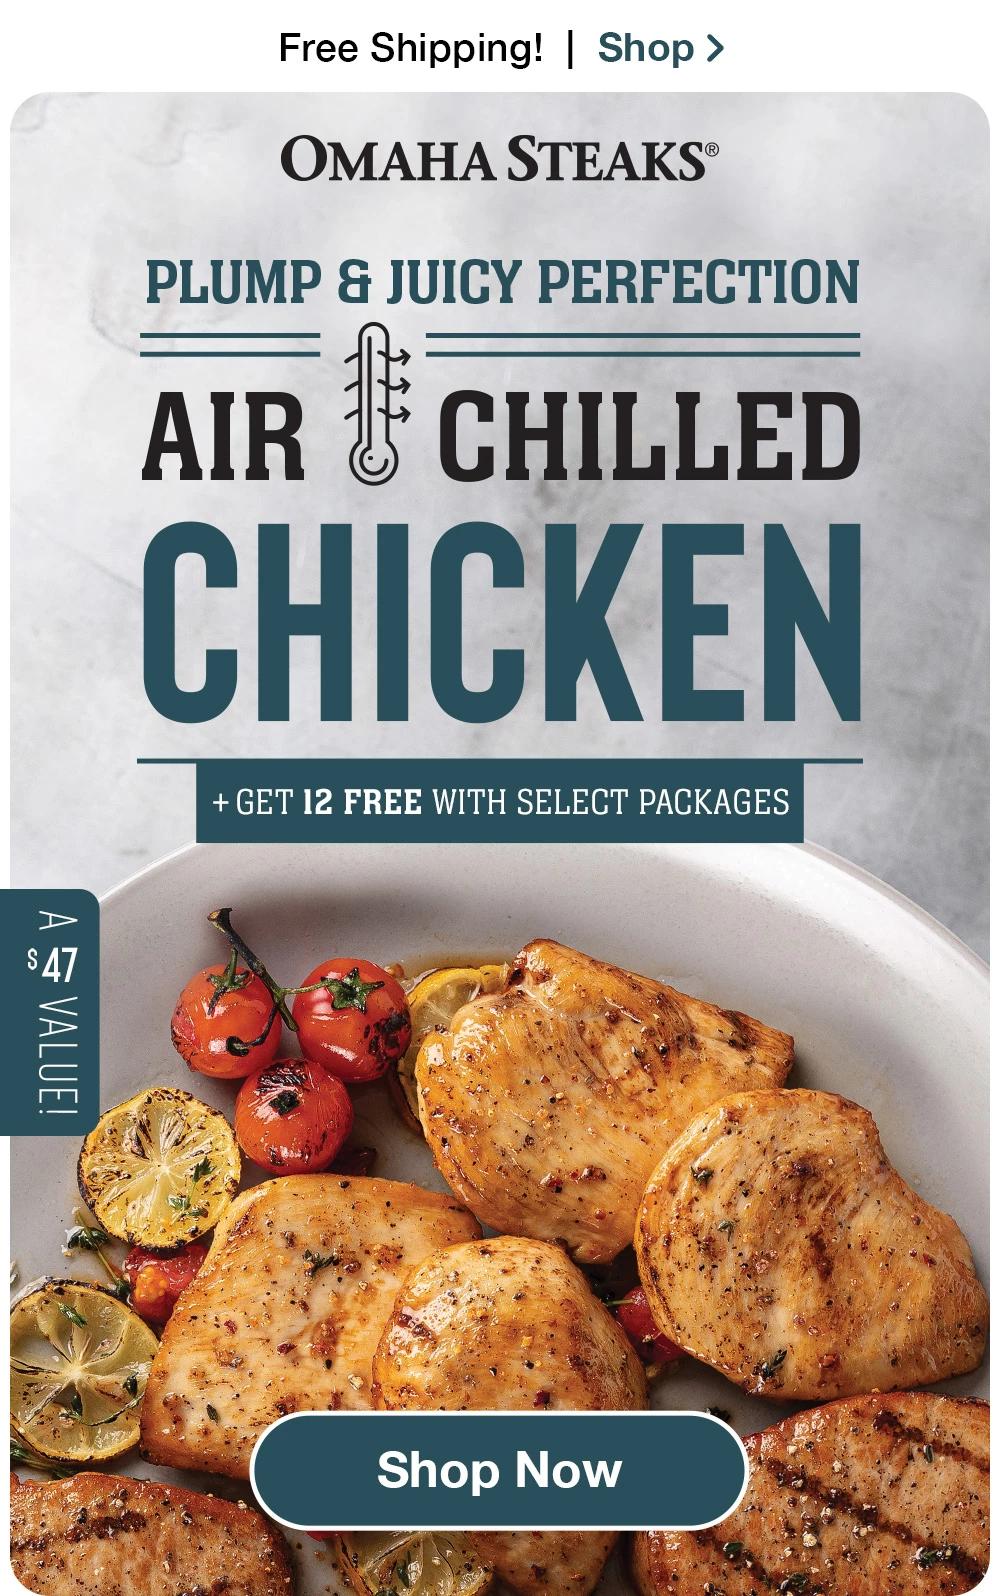 Free Shipping! | Shop >  ОМАНА STEAKS® PLUMP & JUICY PERFECTION AIR CHILLED CHICKEN + GET 12 FREE WITH SELECT PACKAGES | A $59 value! || Shop Now